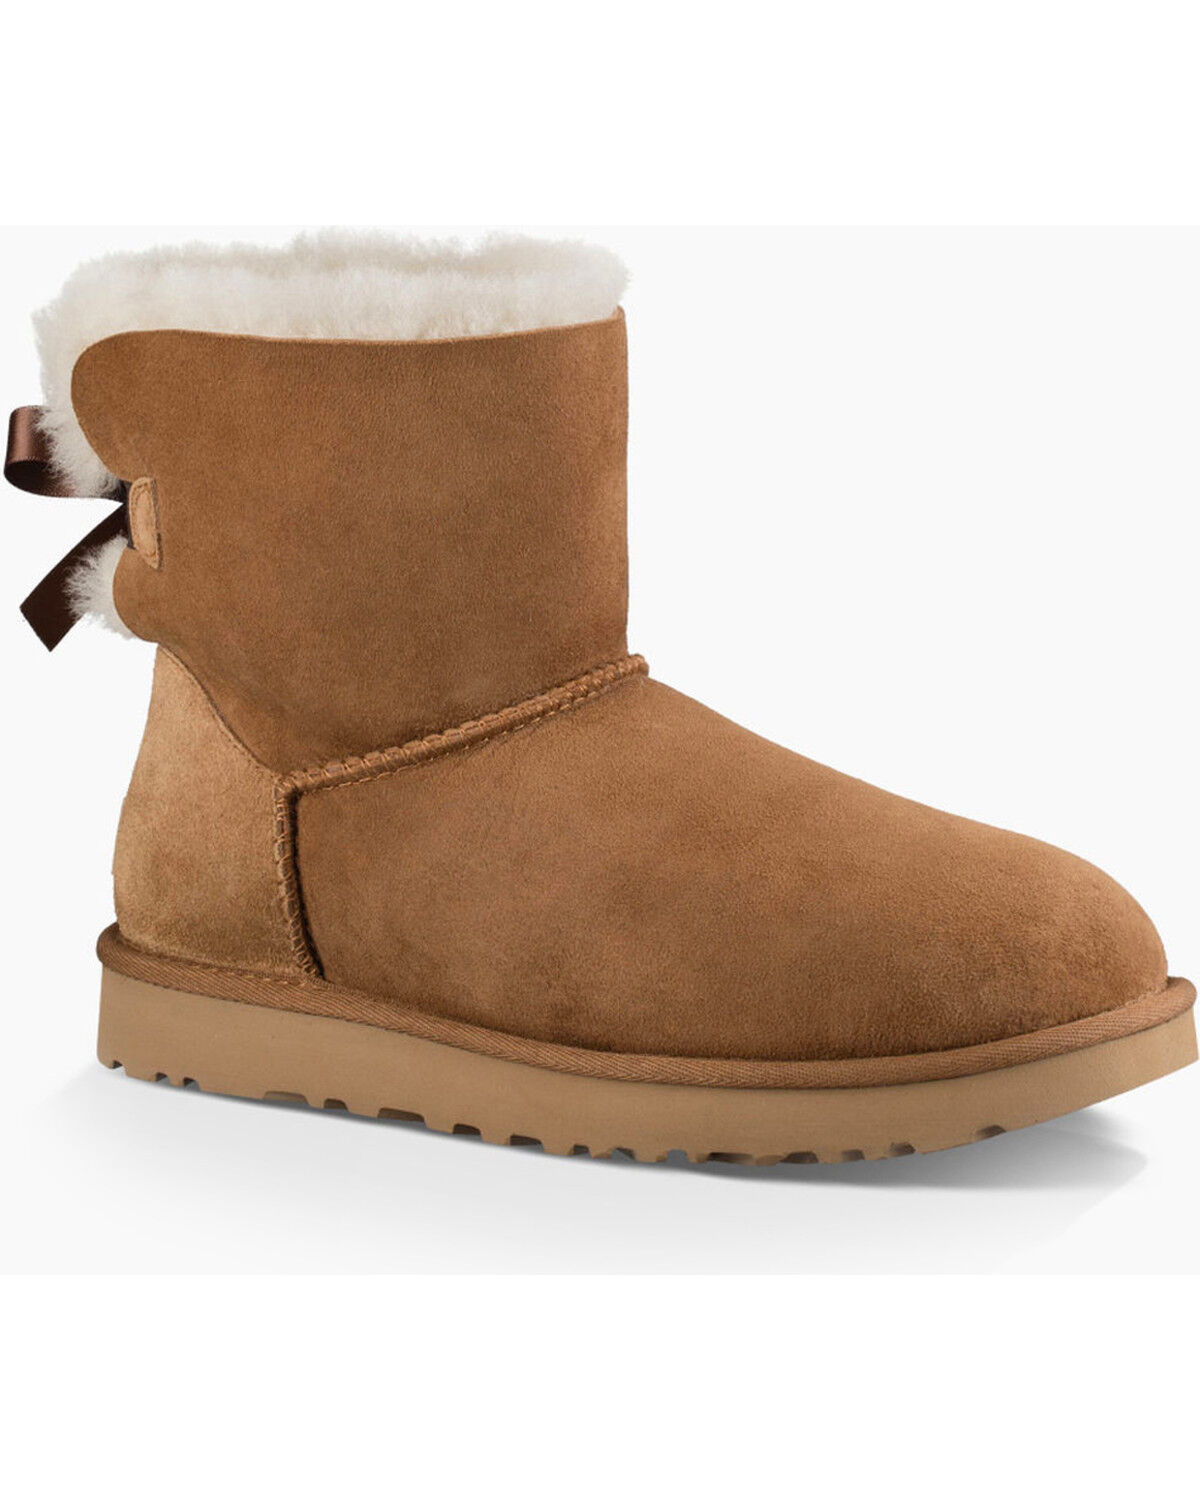 cheap ugg boots for sale usa